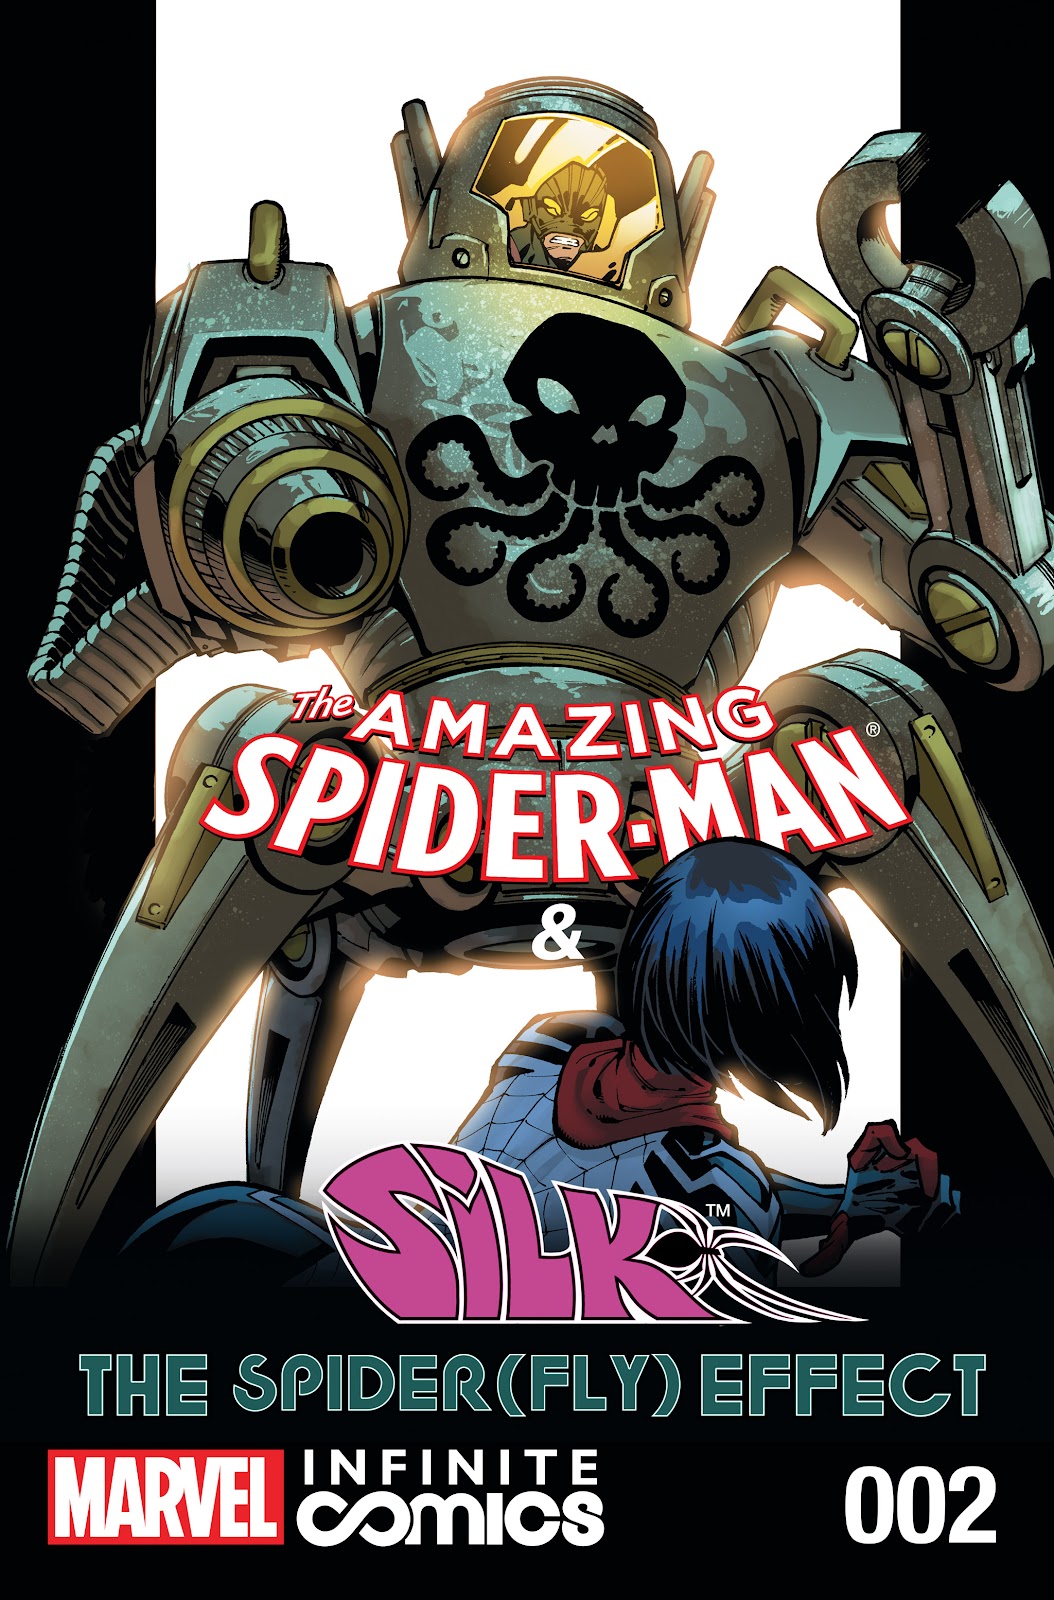 The Amazing Spider-Man & Silk: The Spider(fly) Effect (Infinite Comics) issue 2 - Page 1